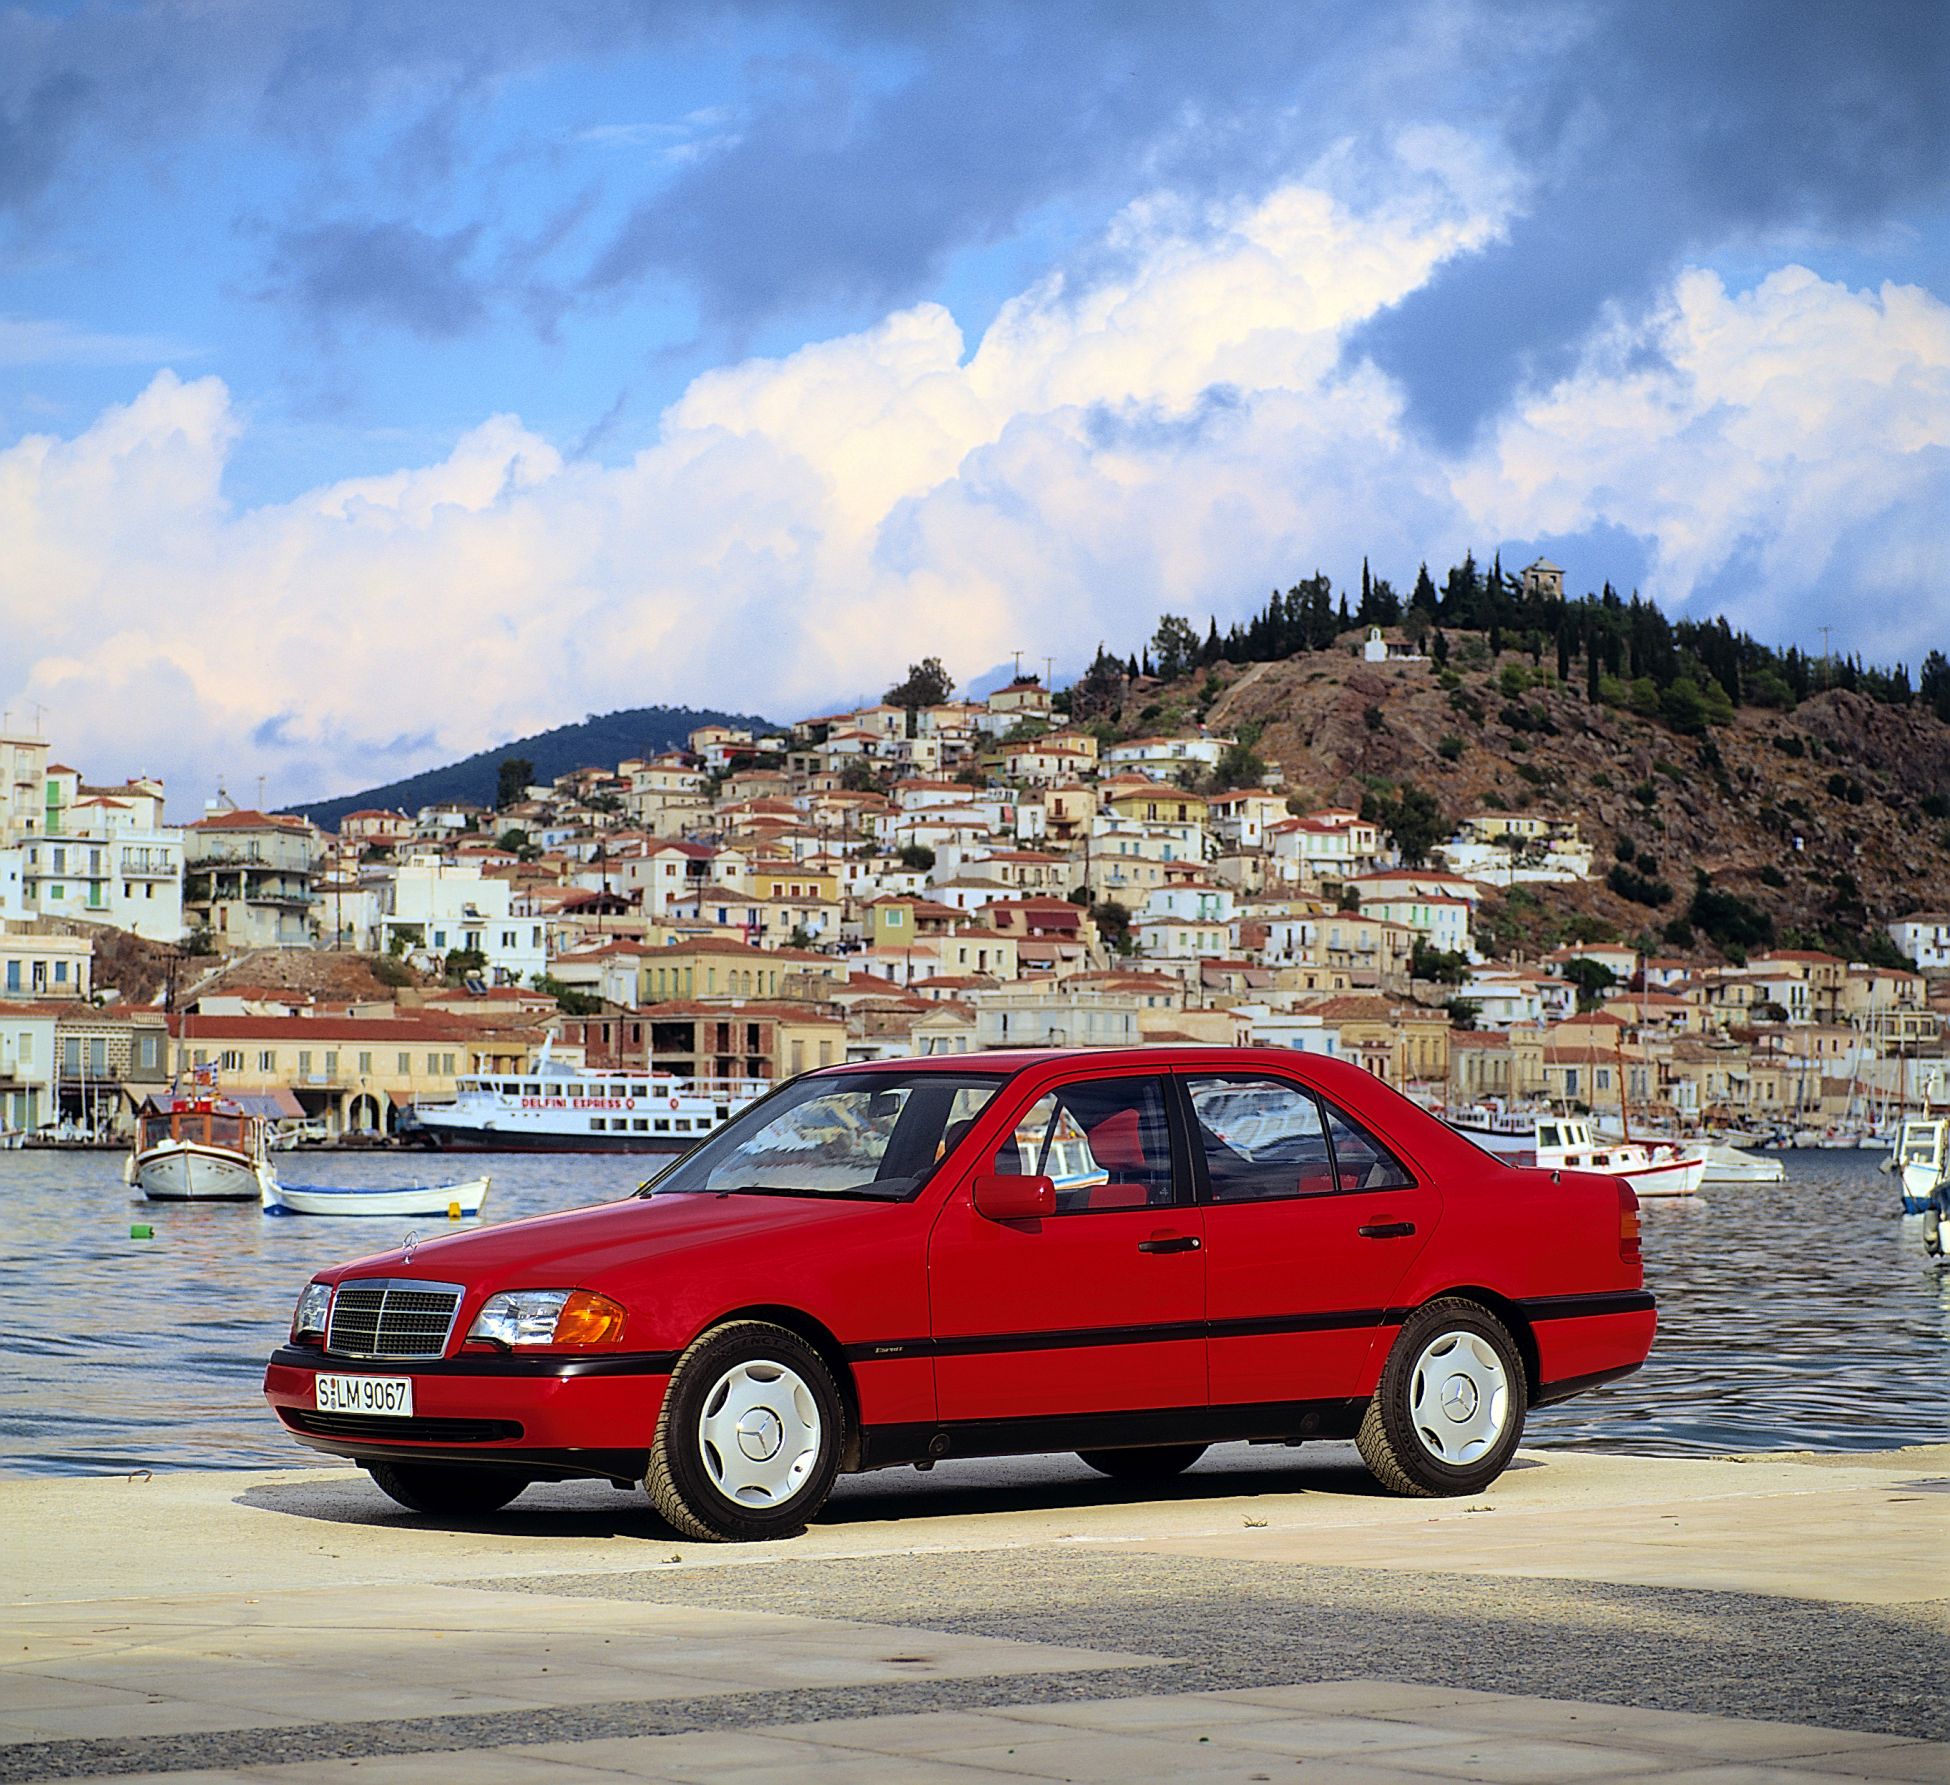 https://s1.cdn.autoevolution.com/images/news/30th-anniversary-of-the-mercedes-benz-c-class-w202-and-its-sporty-sibling-c-36-amg-204894_1.jpg